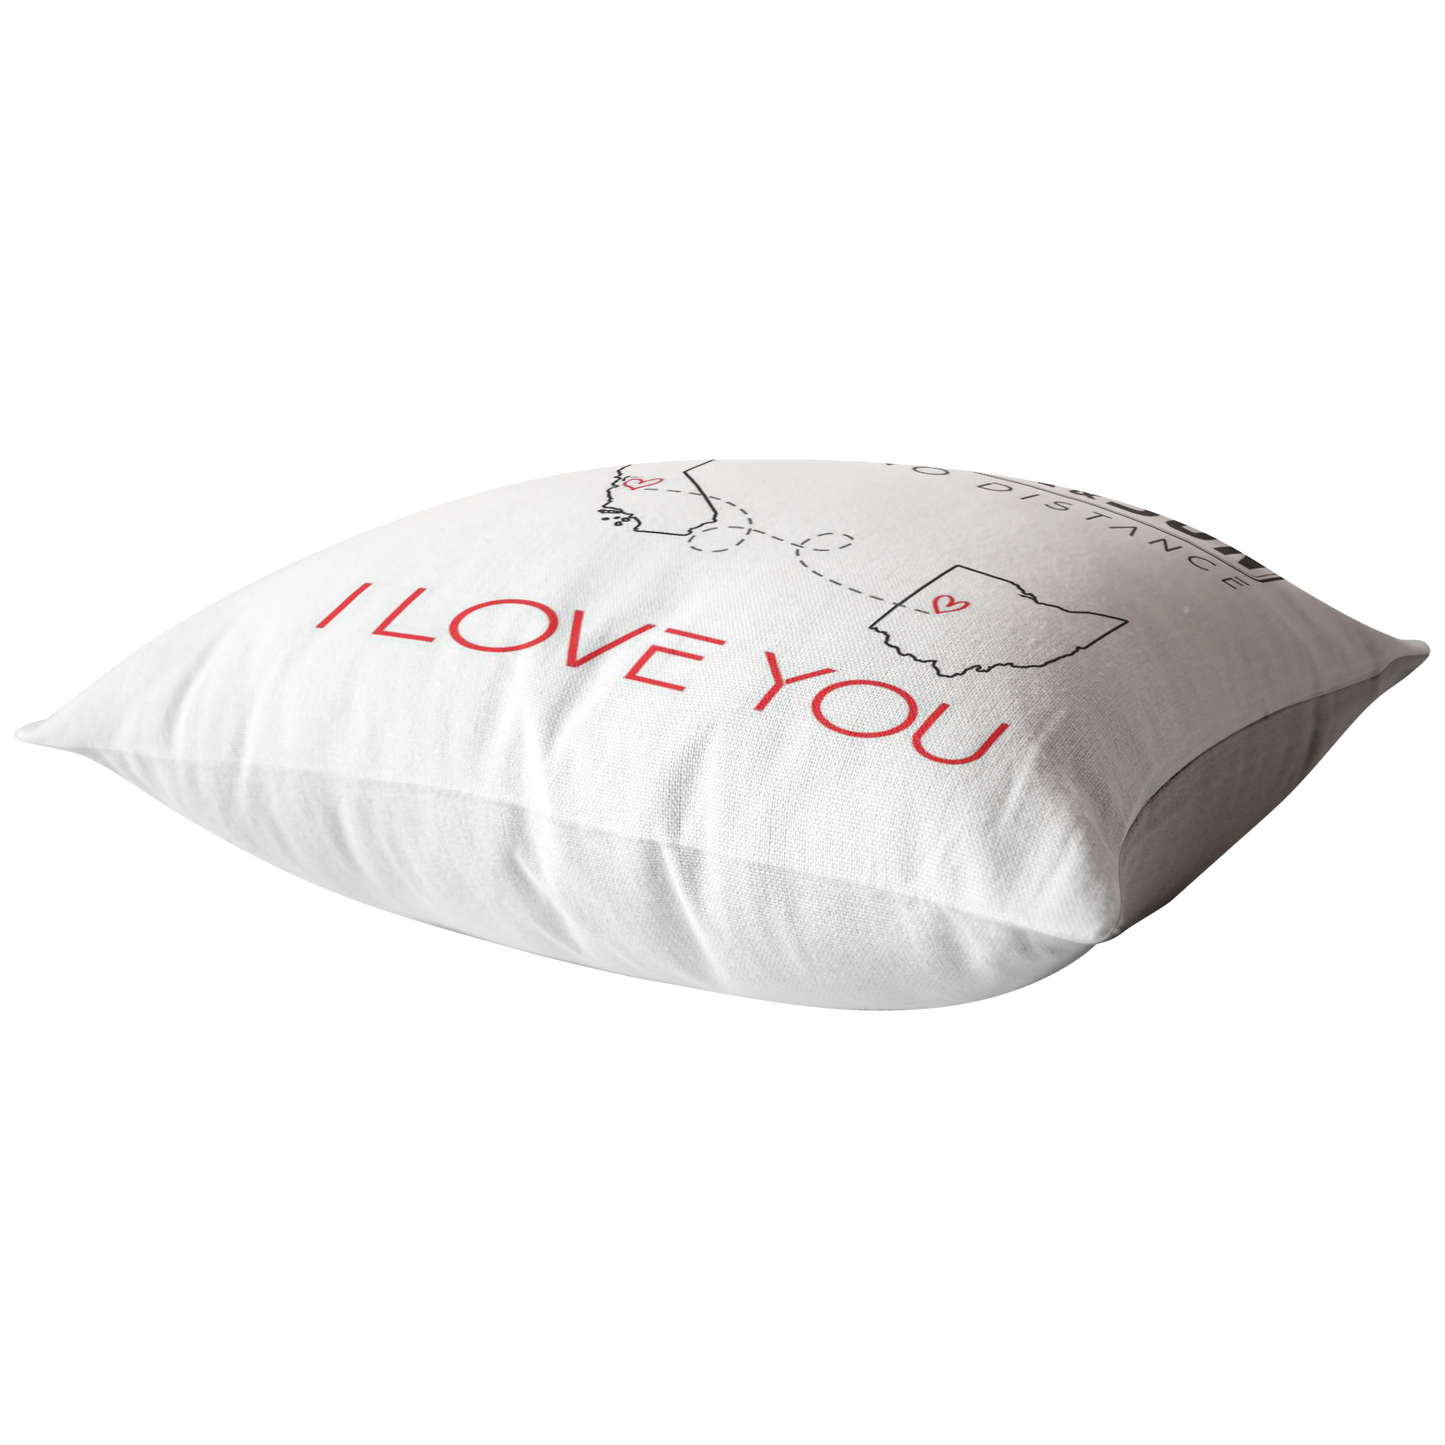 ND-pl20419406-sp-35316 - [ California | Ohio | 1 ] (PI_ThrowPillowCovers) Mothers Day Gifts From Son - The Love Between Mother And So